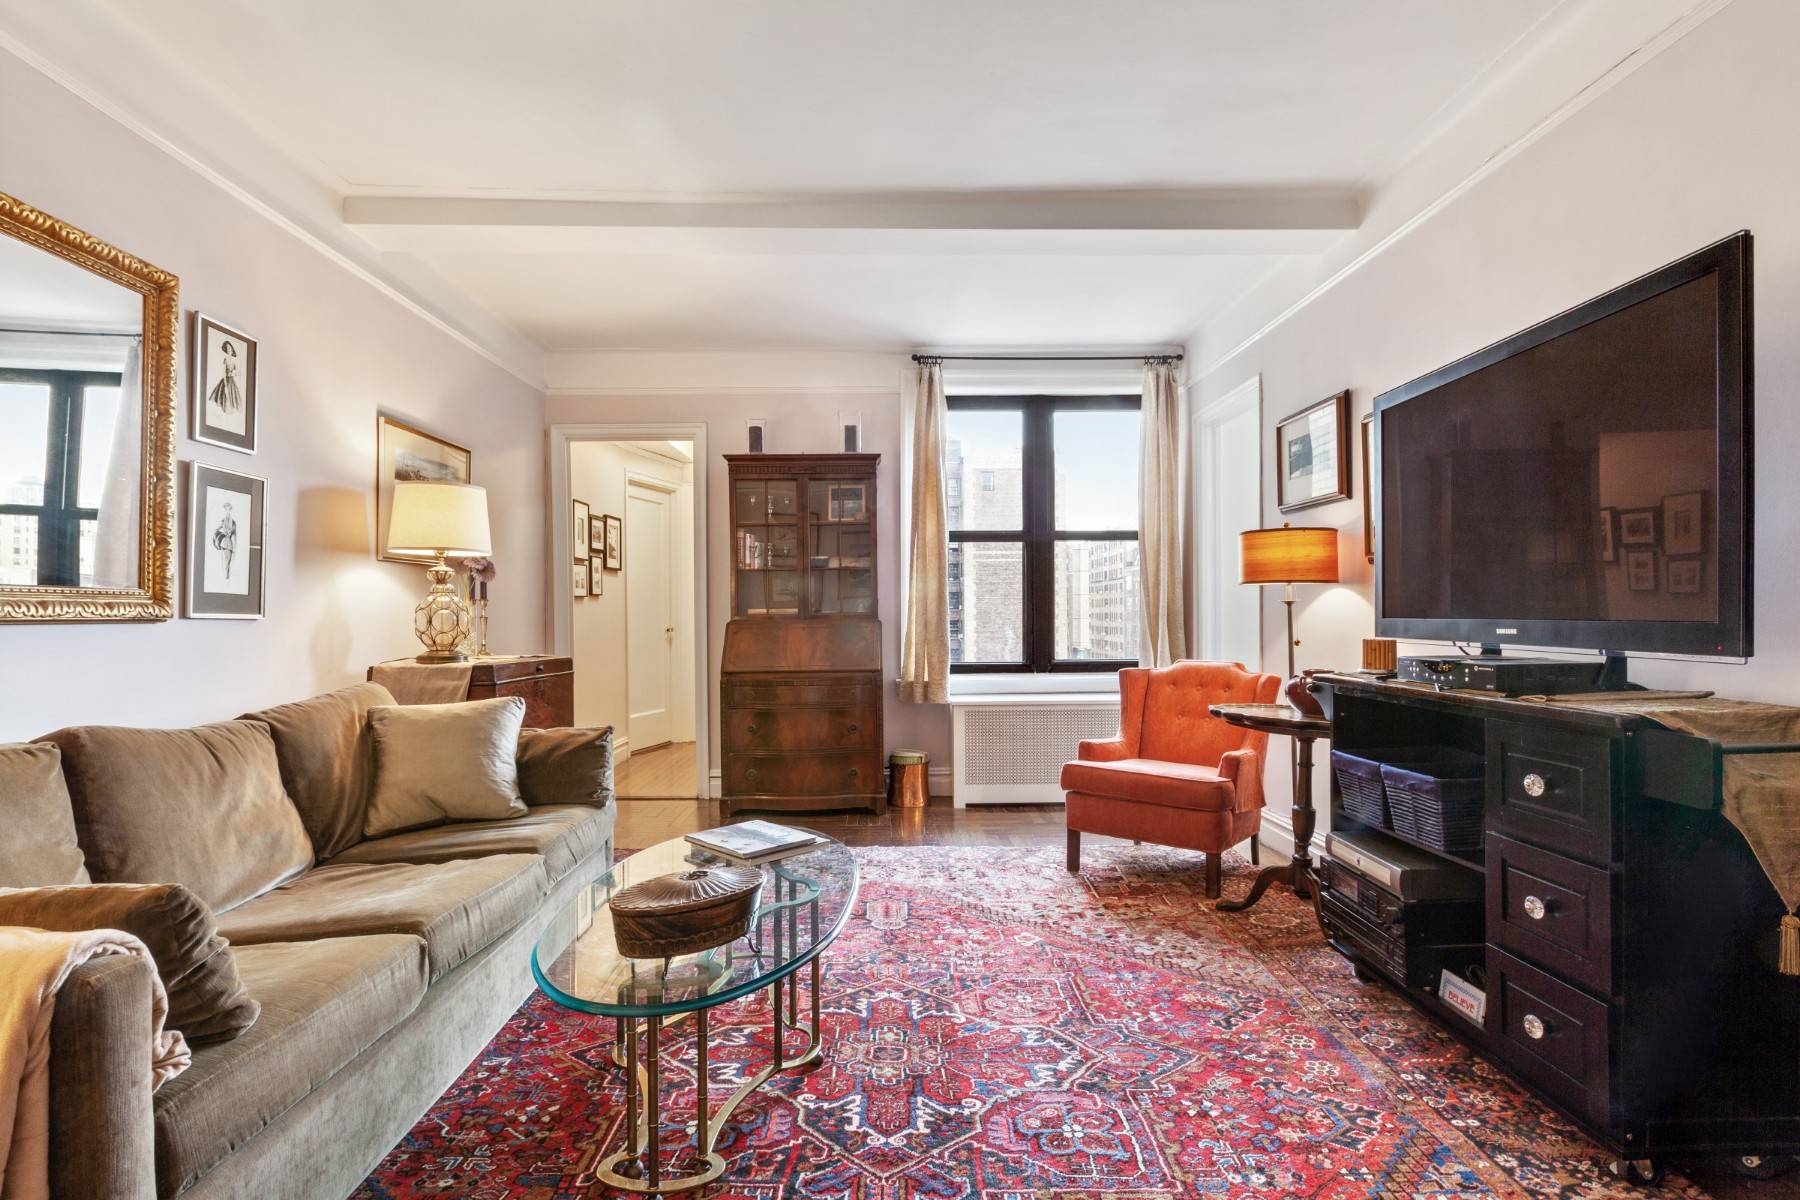 Perched atop a high floor in a well run, coveted prewar building, this wonderfully charming, spacious one bedroom home is a quintessential Upper West Side gem.